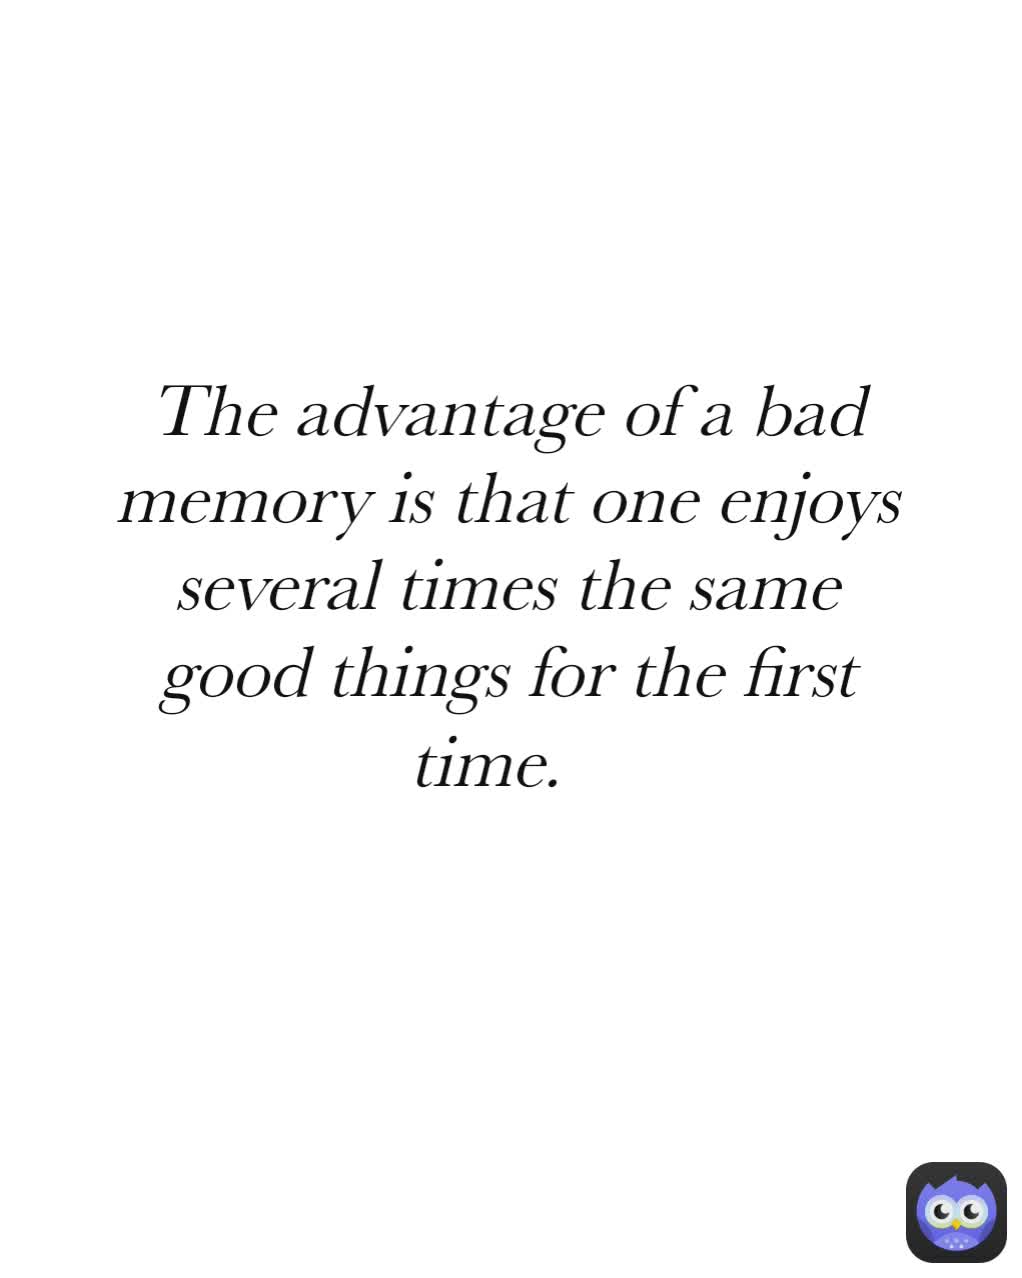 The advantage of a bad memory is that one enjoys several times the same good things for the first time.